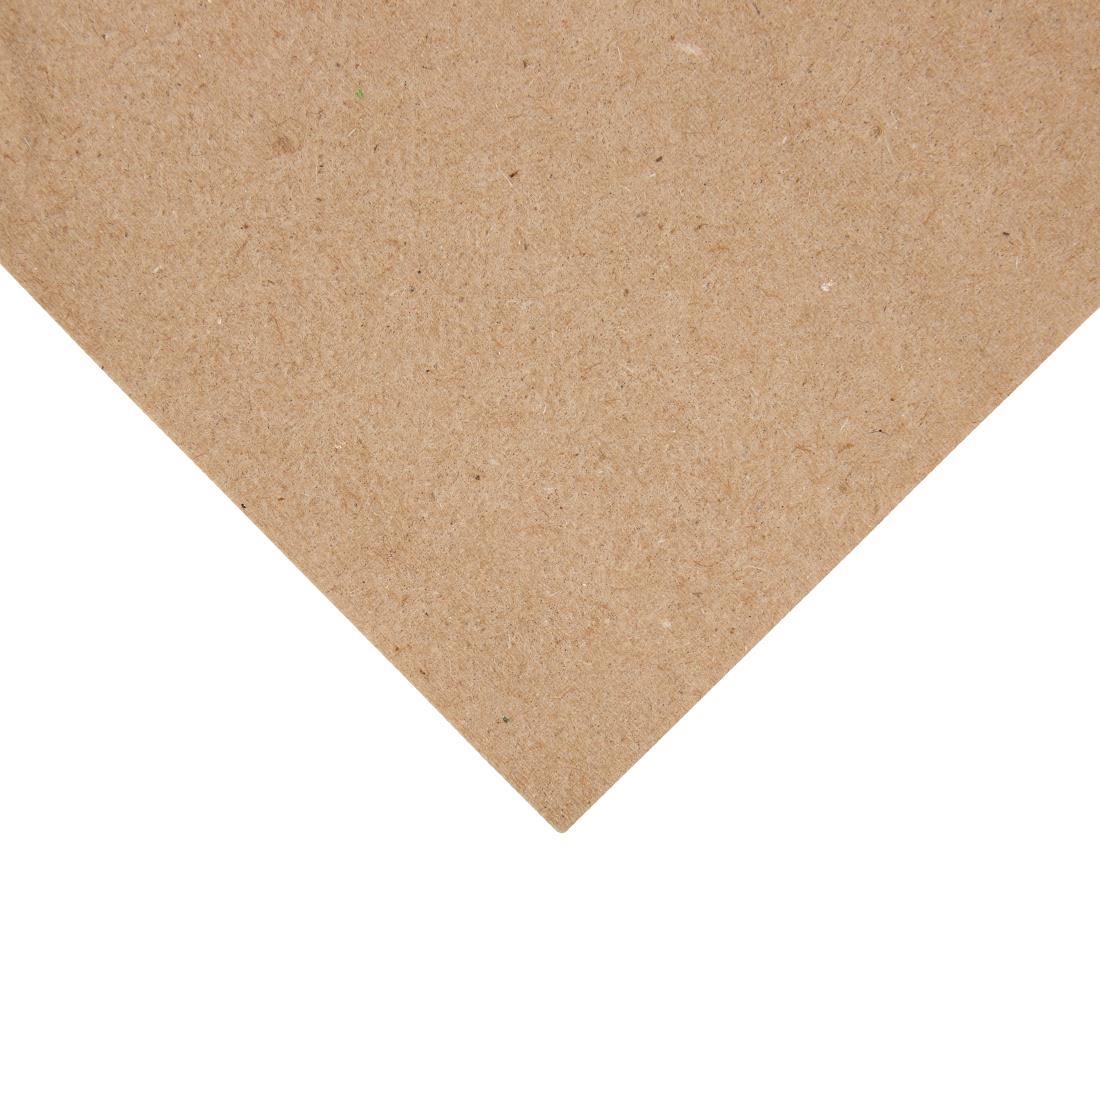 Fiesta Recyclable Recycled Dinner Napkin Kraft 40x40cm 2ply 1/8 Fold (Pack of 2000) - FE250  - 2